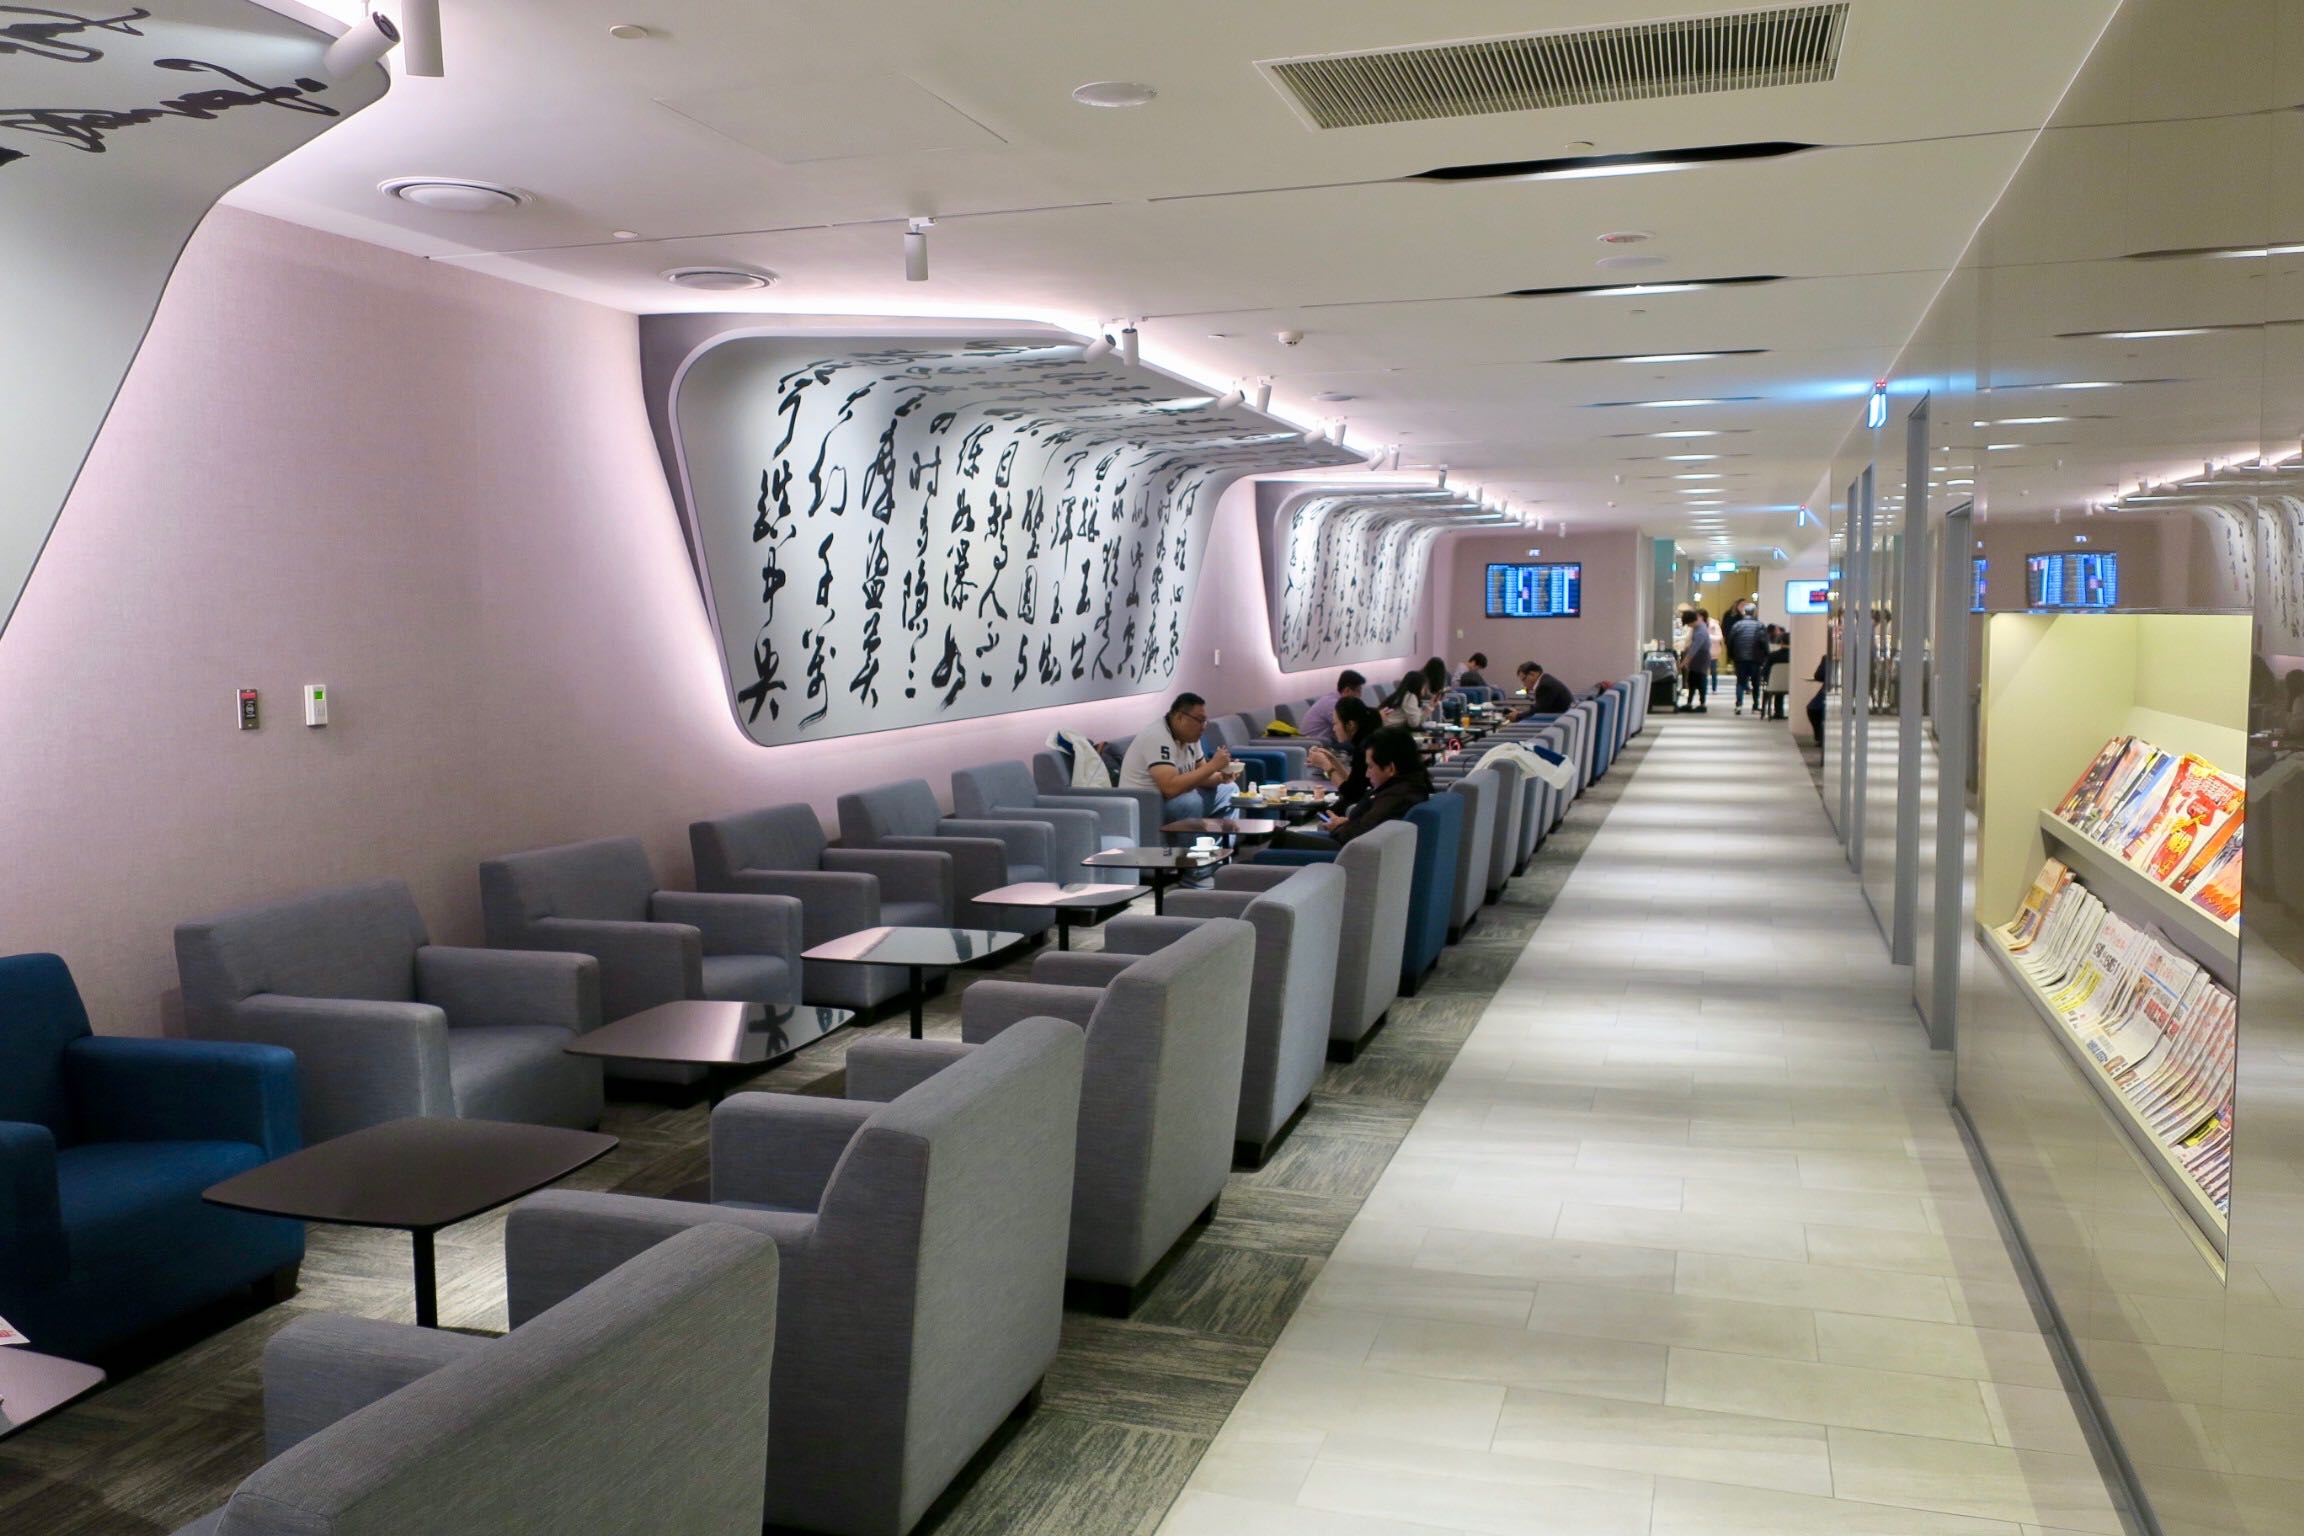 China Airlines Lounge near Gate D4